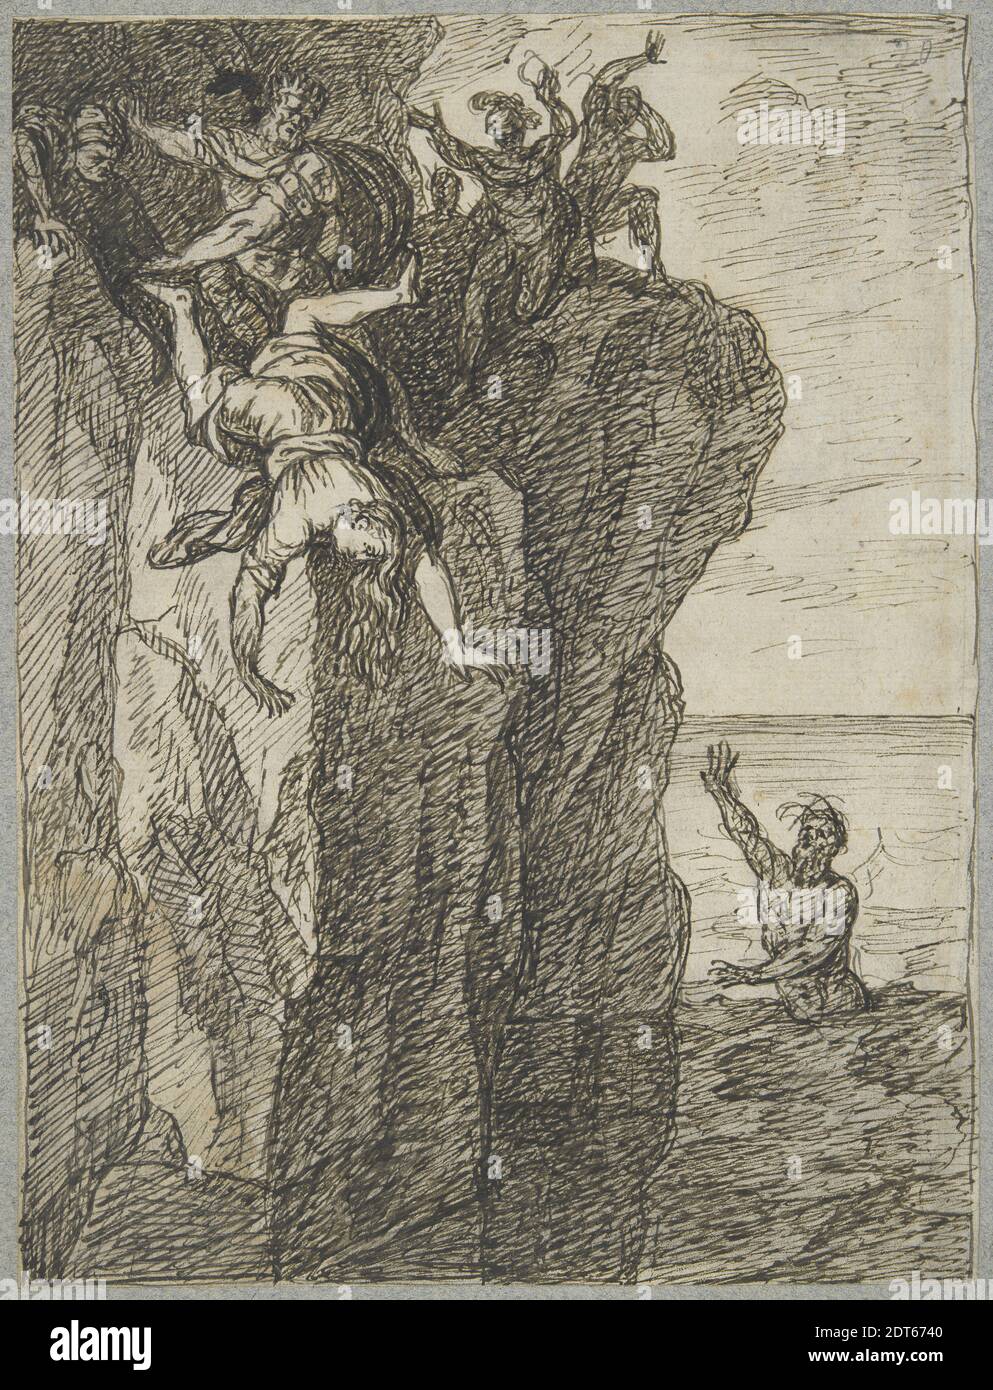 Artist, attributed to: Jean-Baptiste Regnault, French, 1754–1829, Perimele  Thrown off a Cliff by Her Father Hippodamas, mid-18th to mid-19th century,  Pen and brown ink on laid paper mounted on heavy blue wove